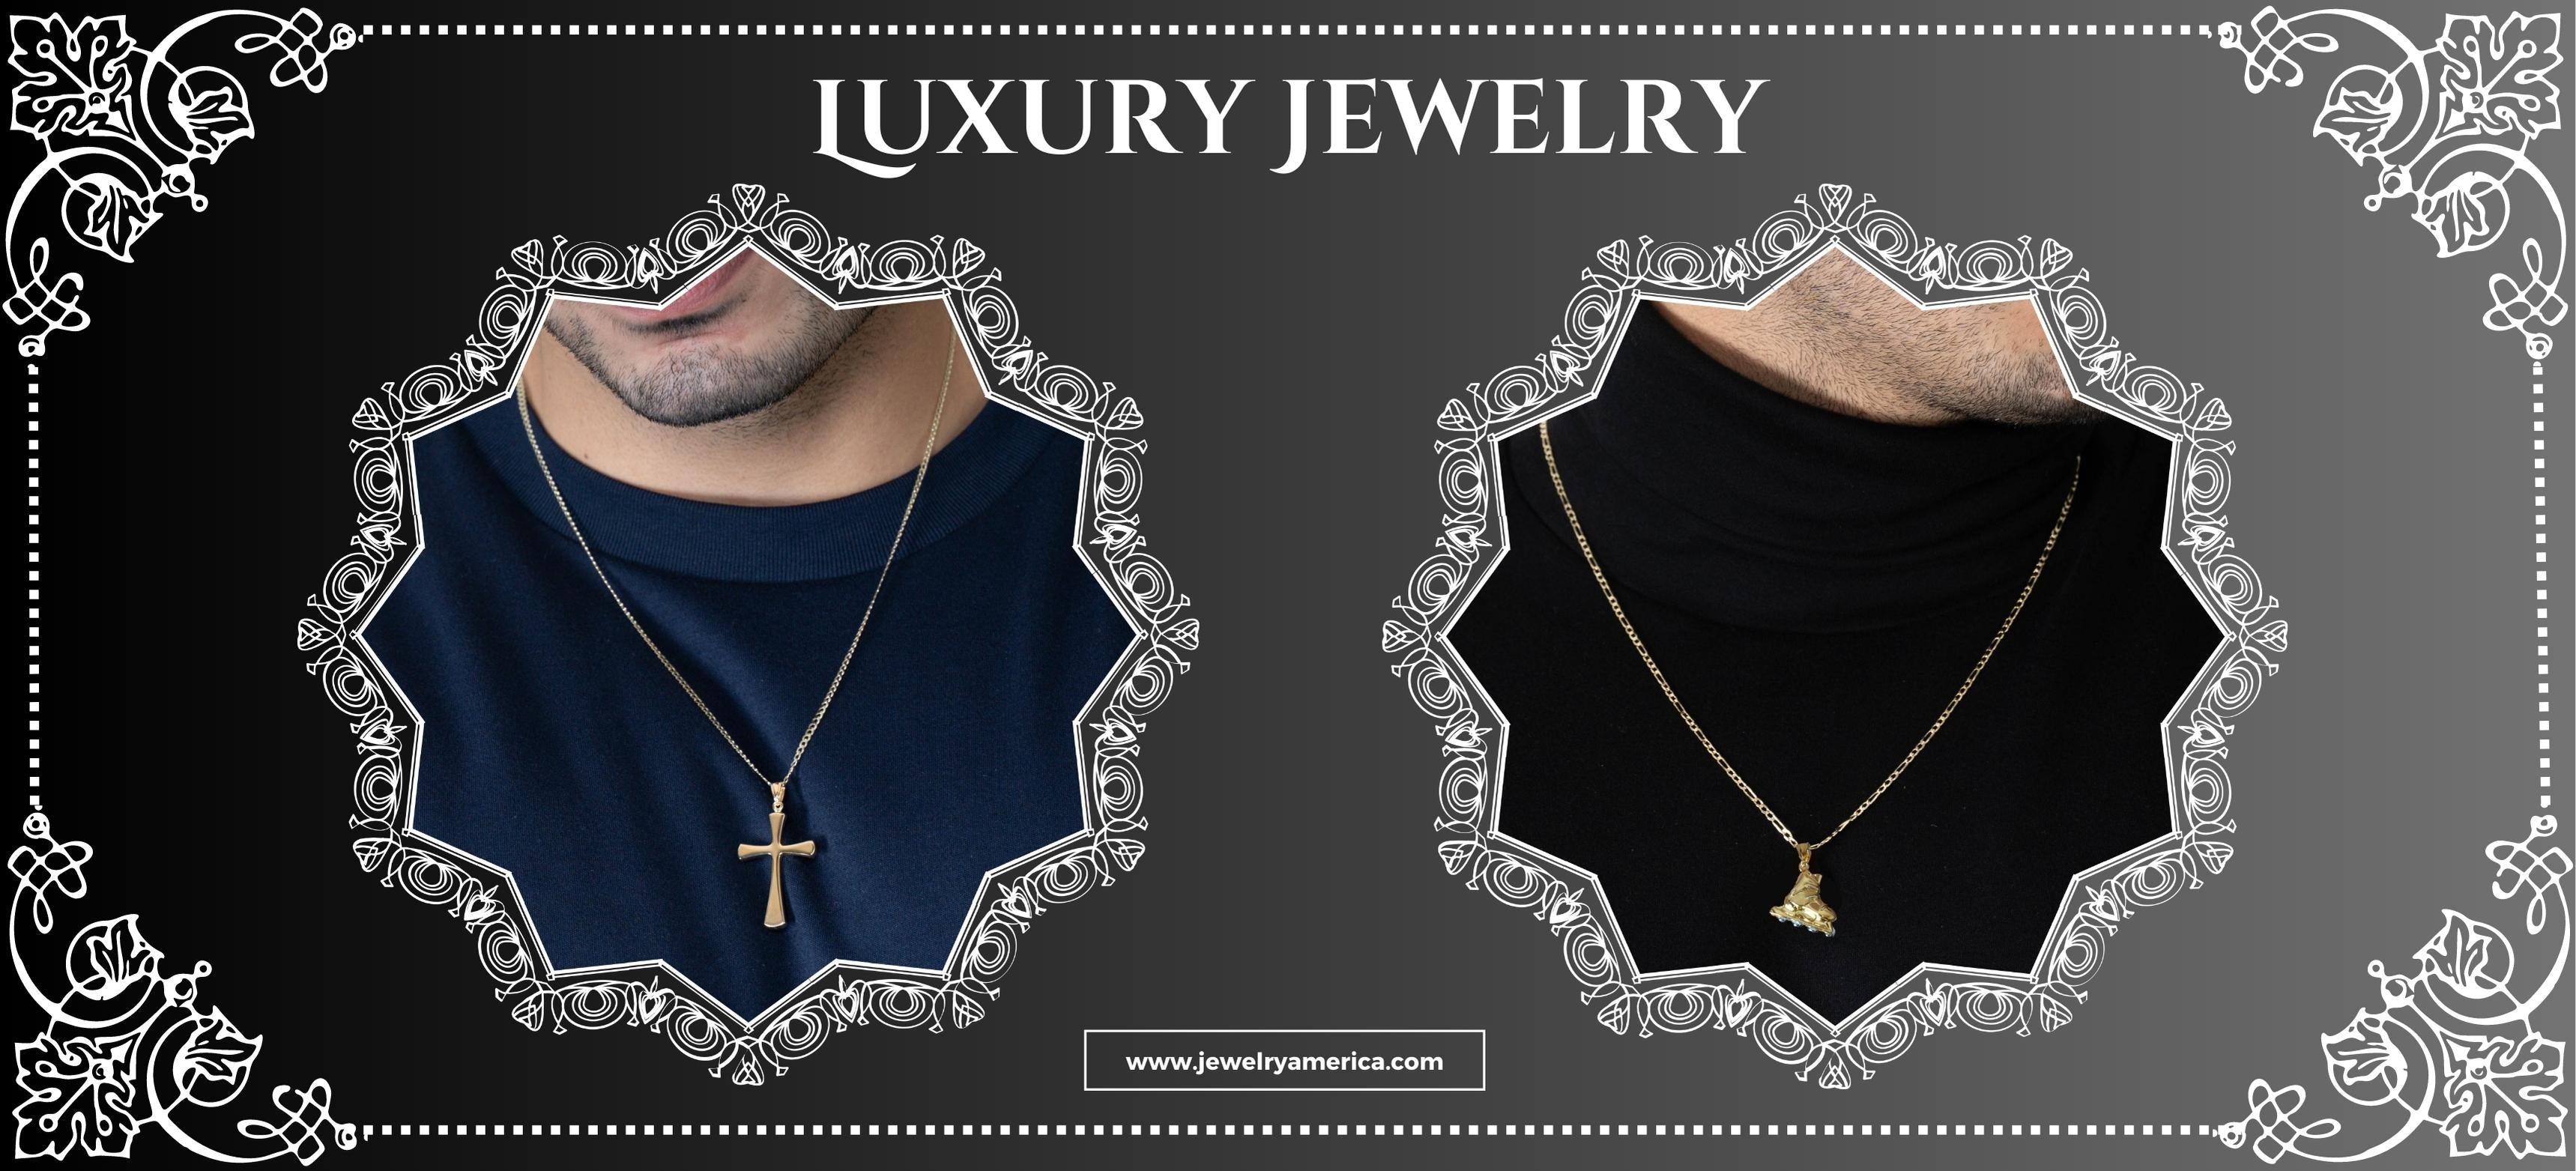 Why Do Men Wear Pendants And Necklaces?